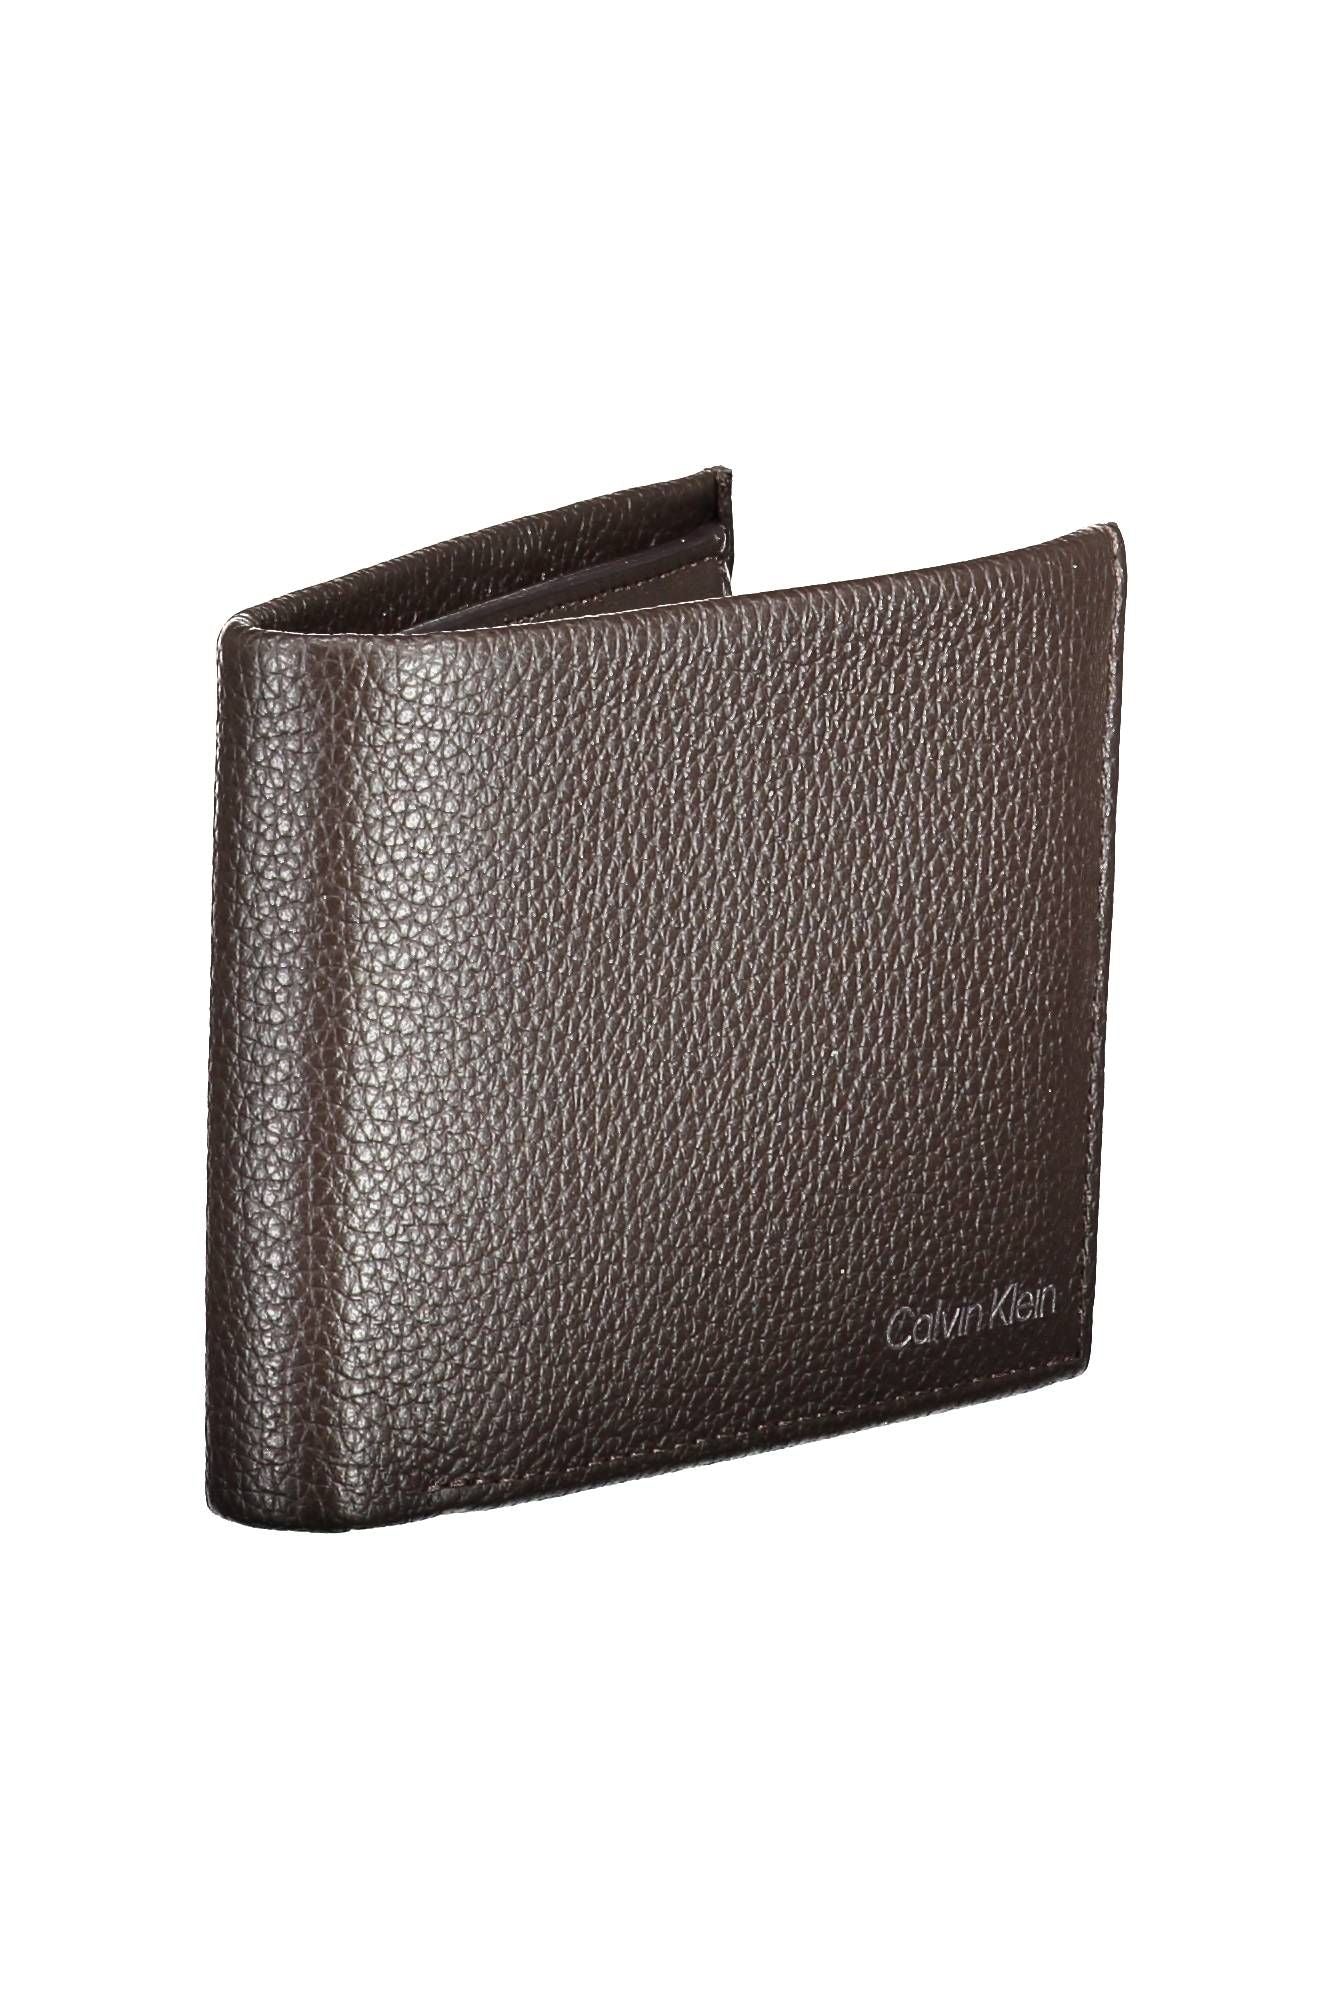 Calvin Klein Sophisticated Leather Wallet with RFID Block